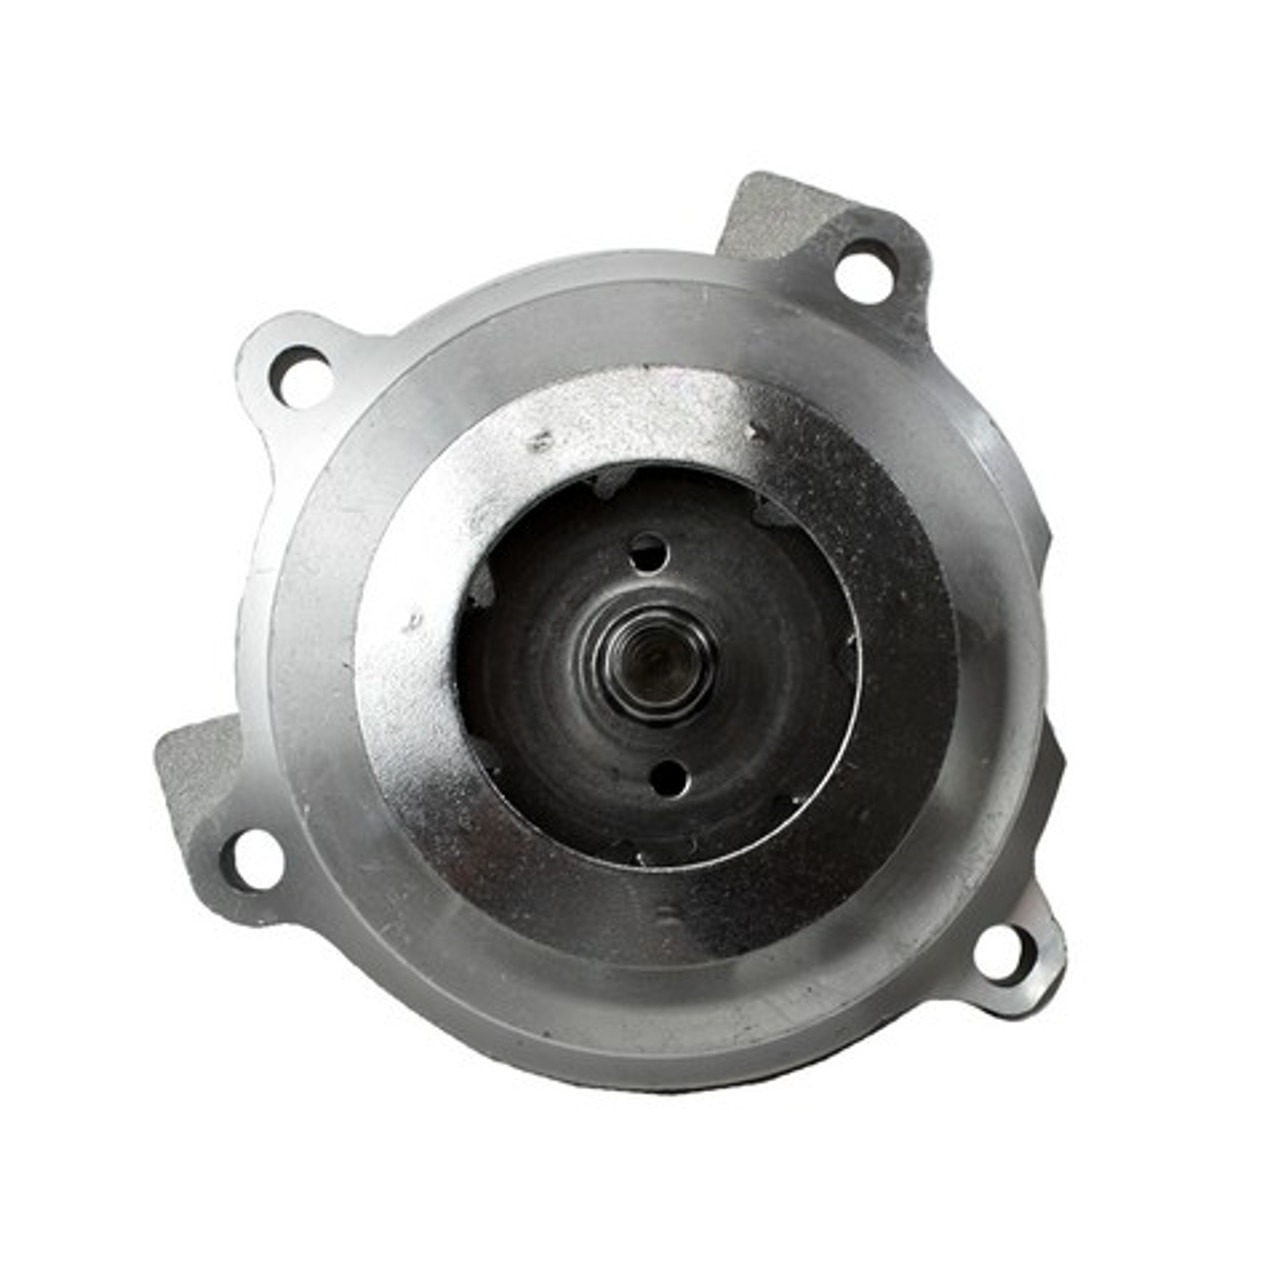 Water Pump 4.6L 2002 Lincoln Continental - WP4143.8